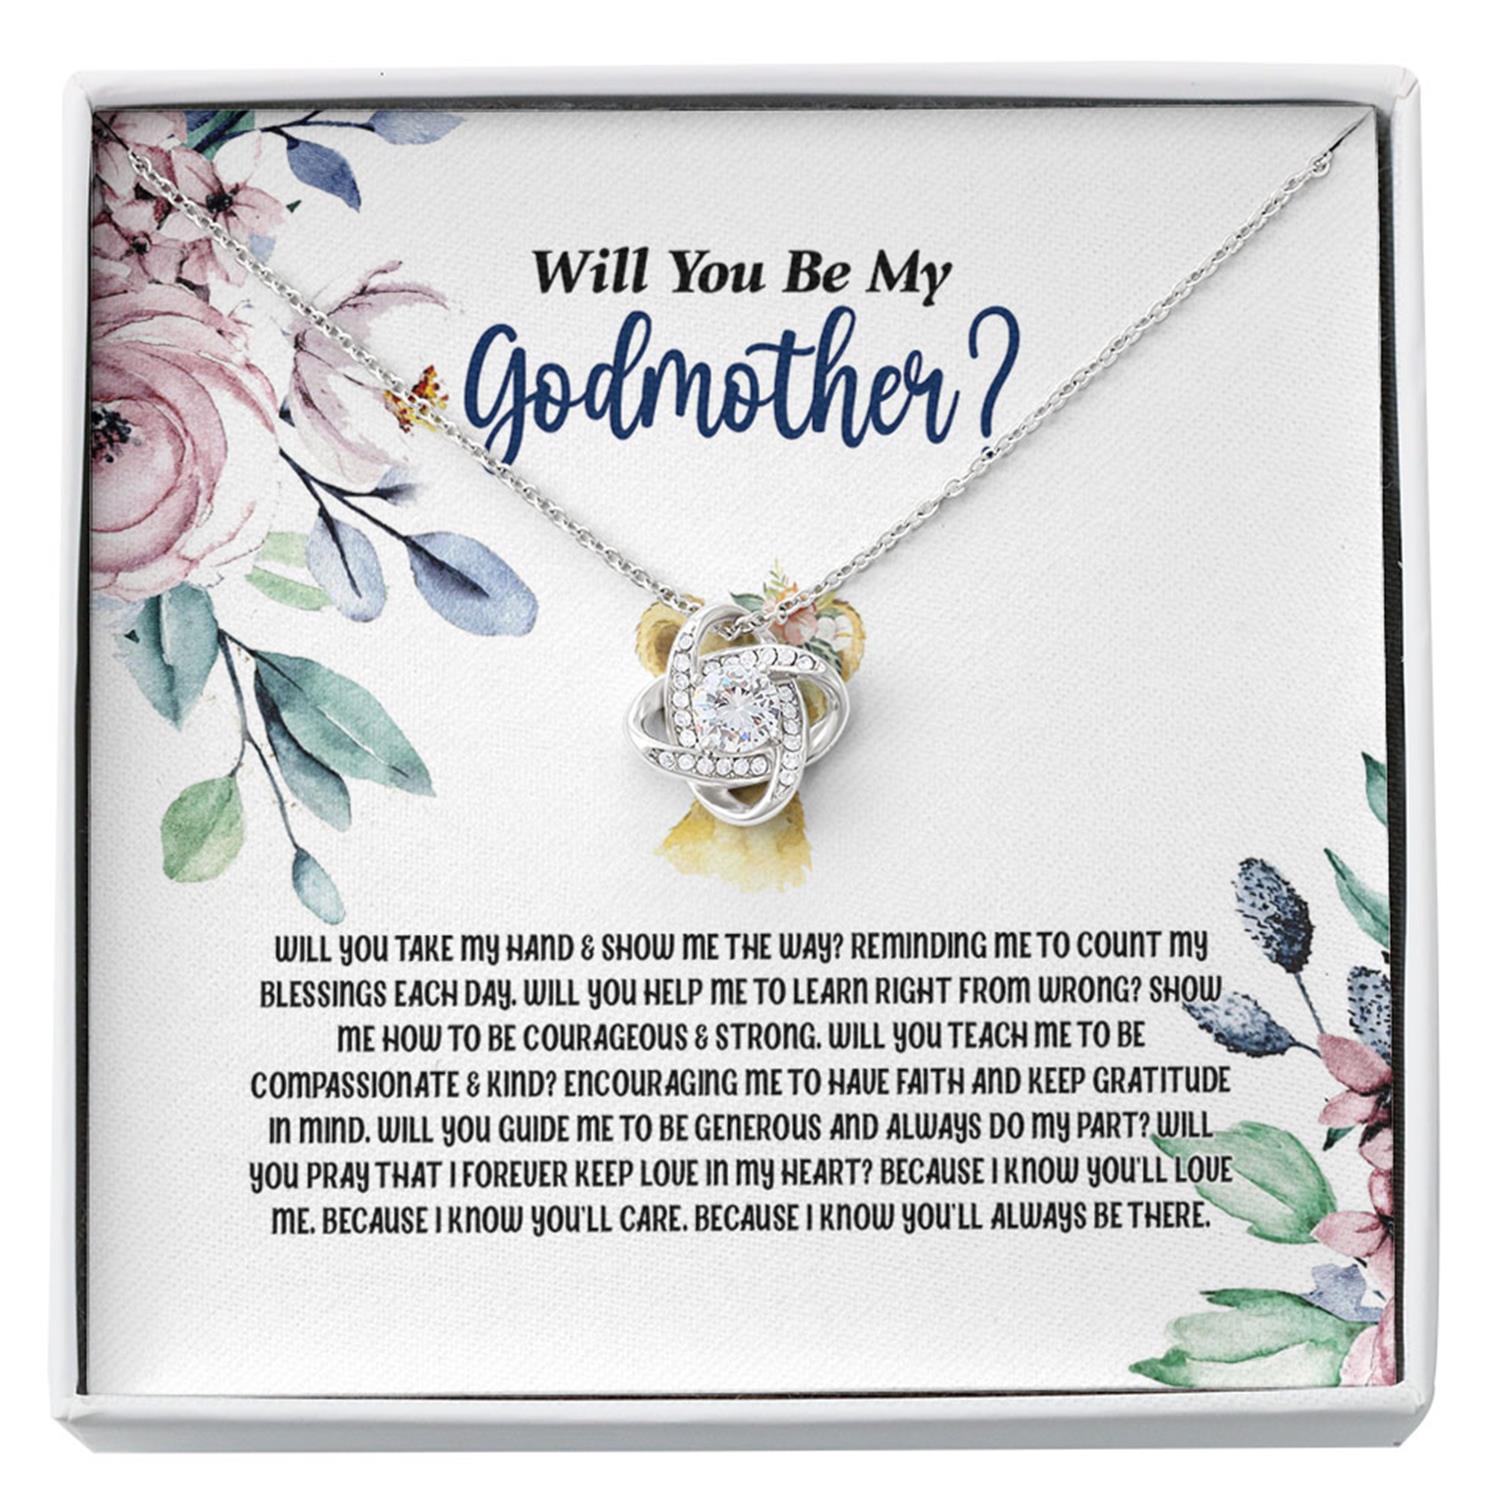 Godmother Necklace, Will You Be My Godmother Necklace, Gift For Future Godmother, Godmother Proposal Custom Necklace